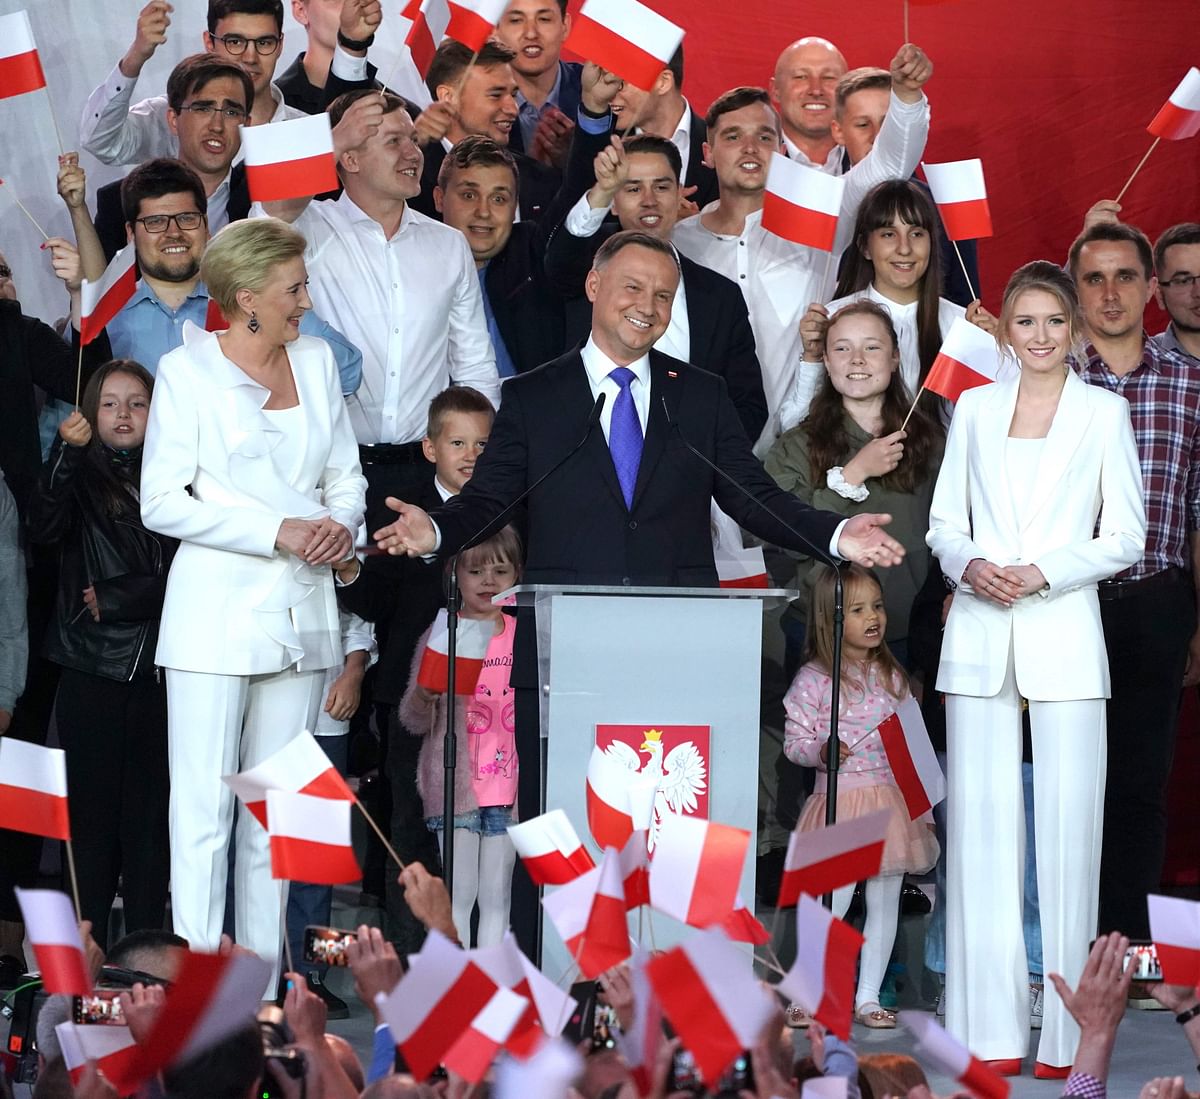 Polish President Andrzej Duda addresses supporters as exit poll results were announced during the presidential election in Pultusk, Poland, on July 12, 2020. - Poland's right-wing head of state Andrzej Duda was ahead by a tiny margin in the presidential run-off against Warsaw's liberal mayor, an exit poll on on July 12, 2020 showed, starting a tense wait for the official results Credit: AFP Photo